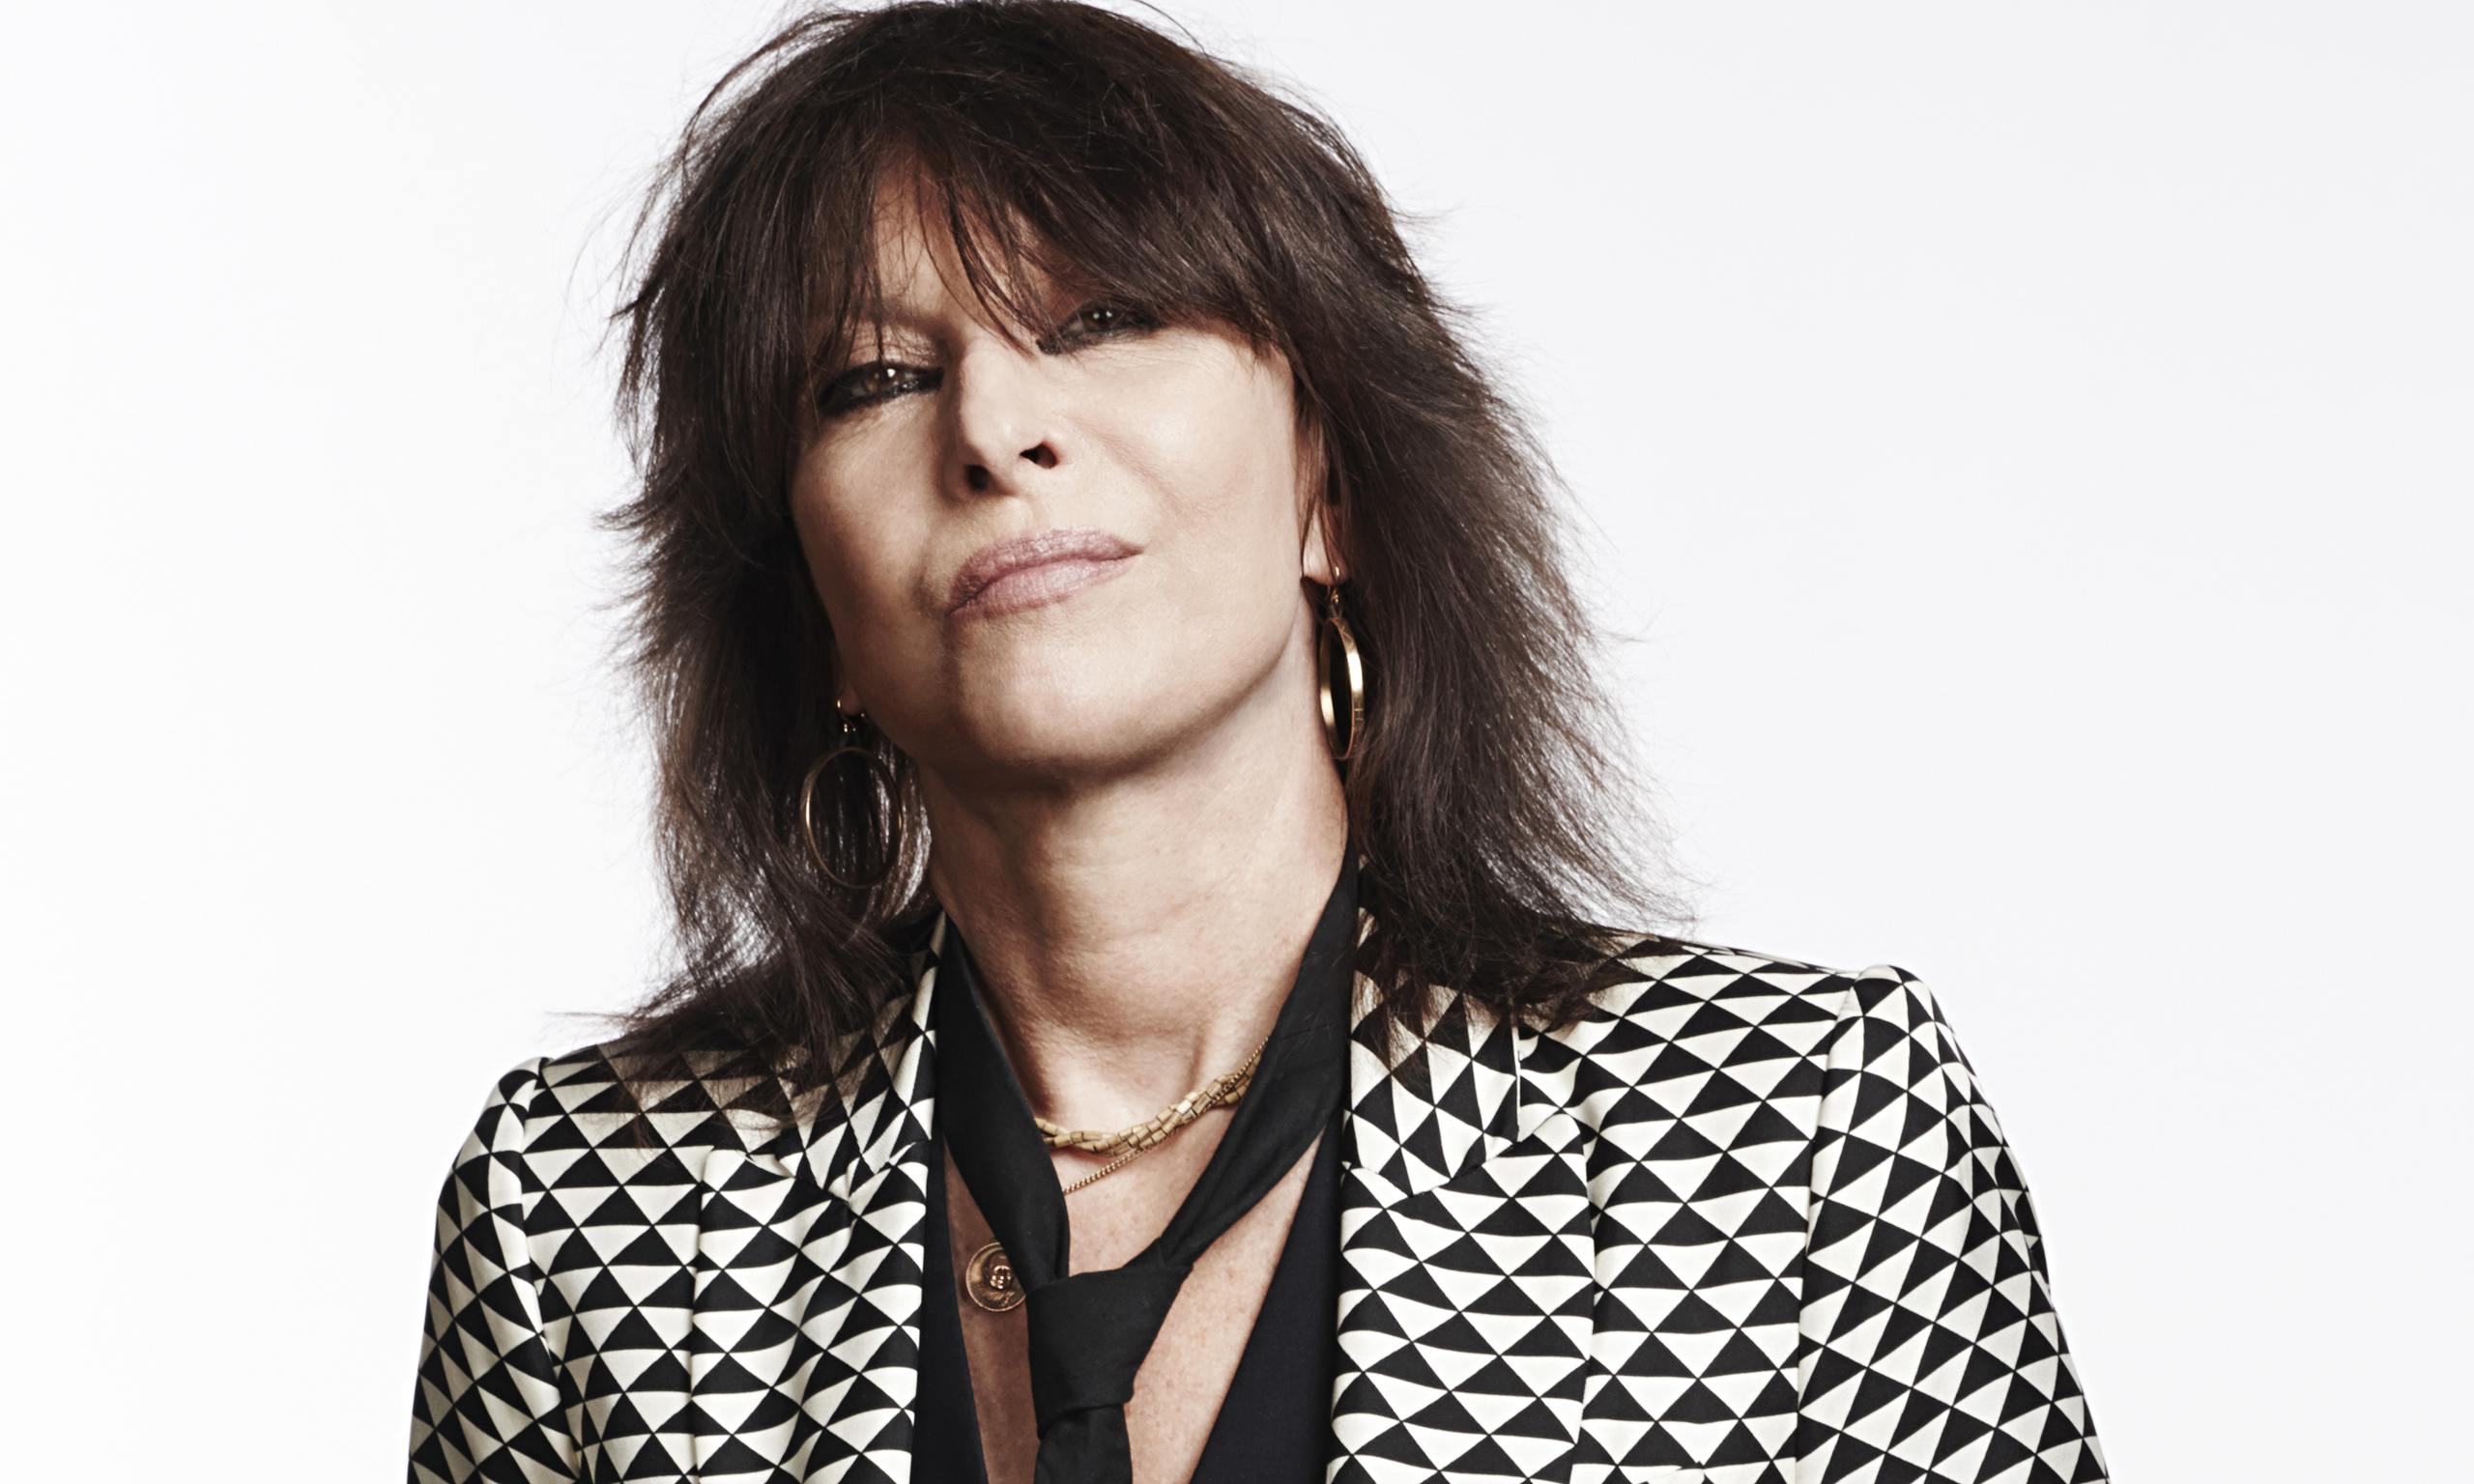 Chrissie Hynde photographed this month for the Observer New Review by Dean Chalkley.